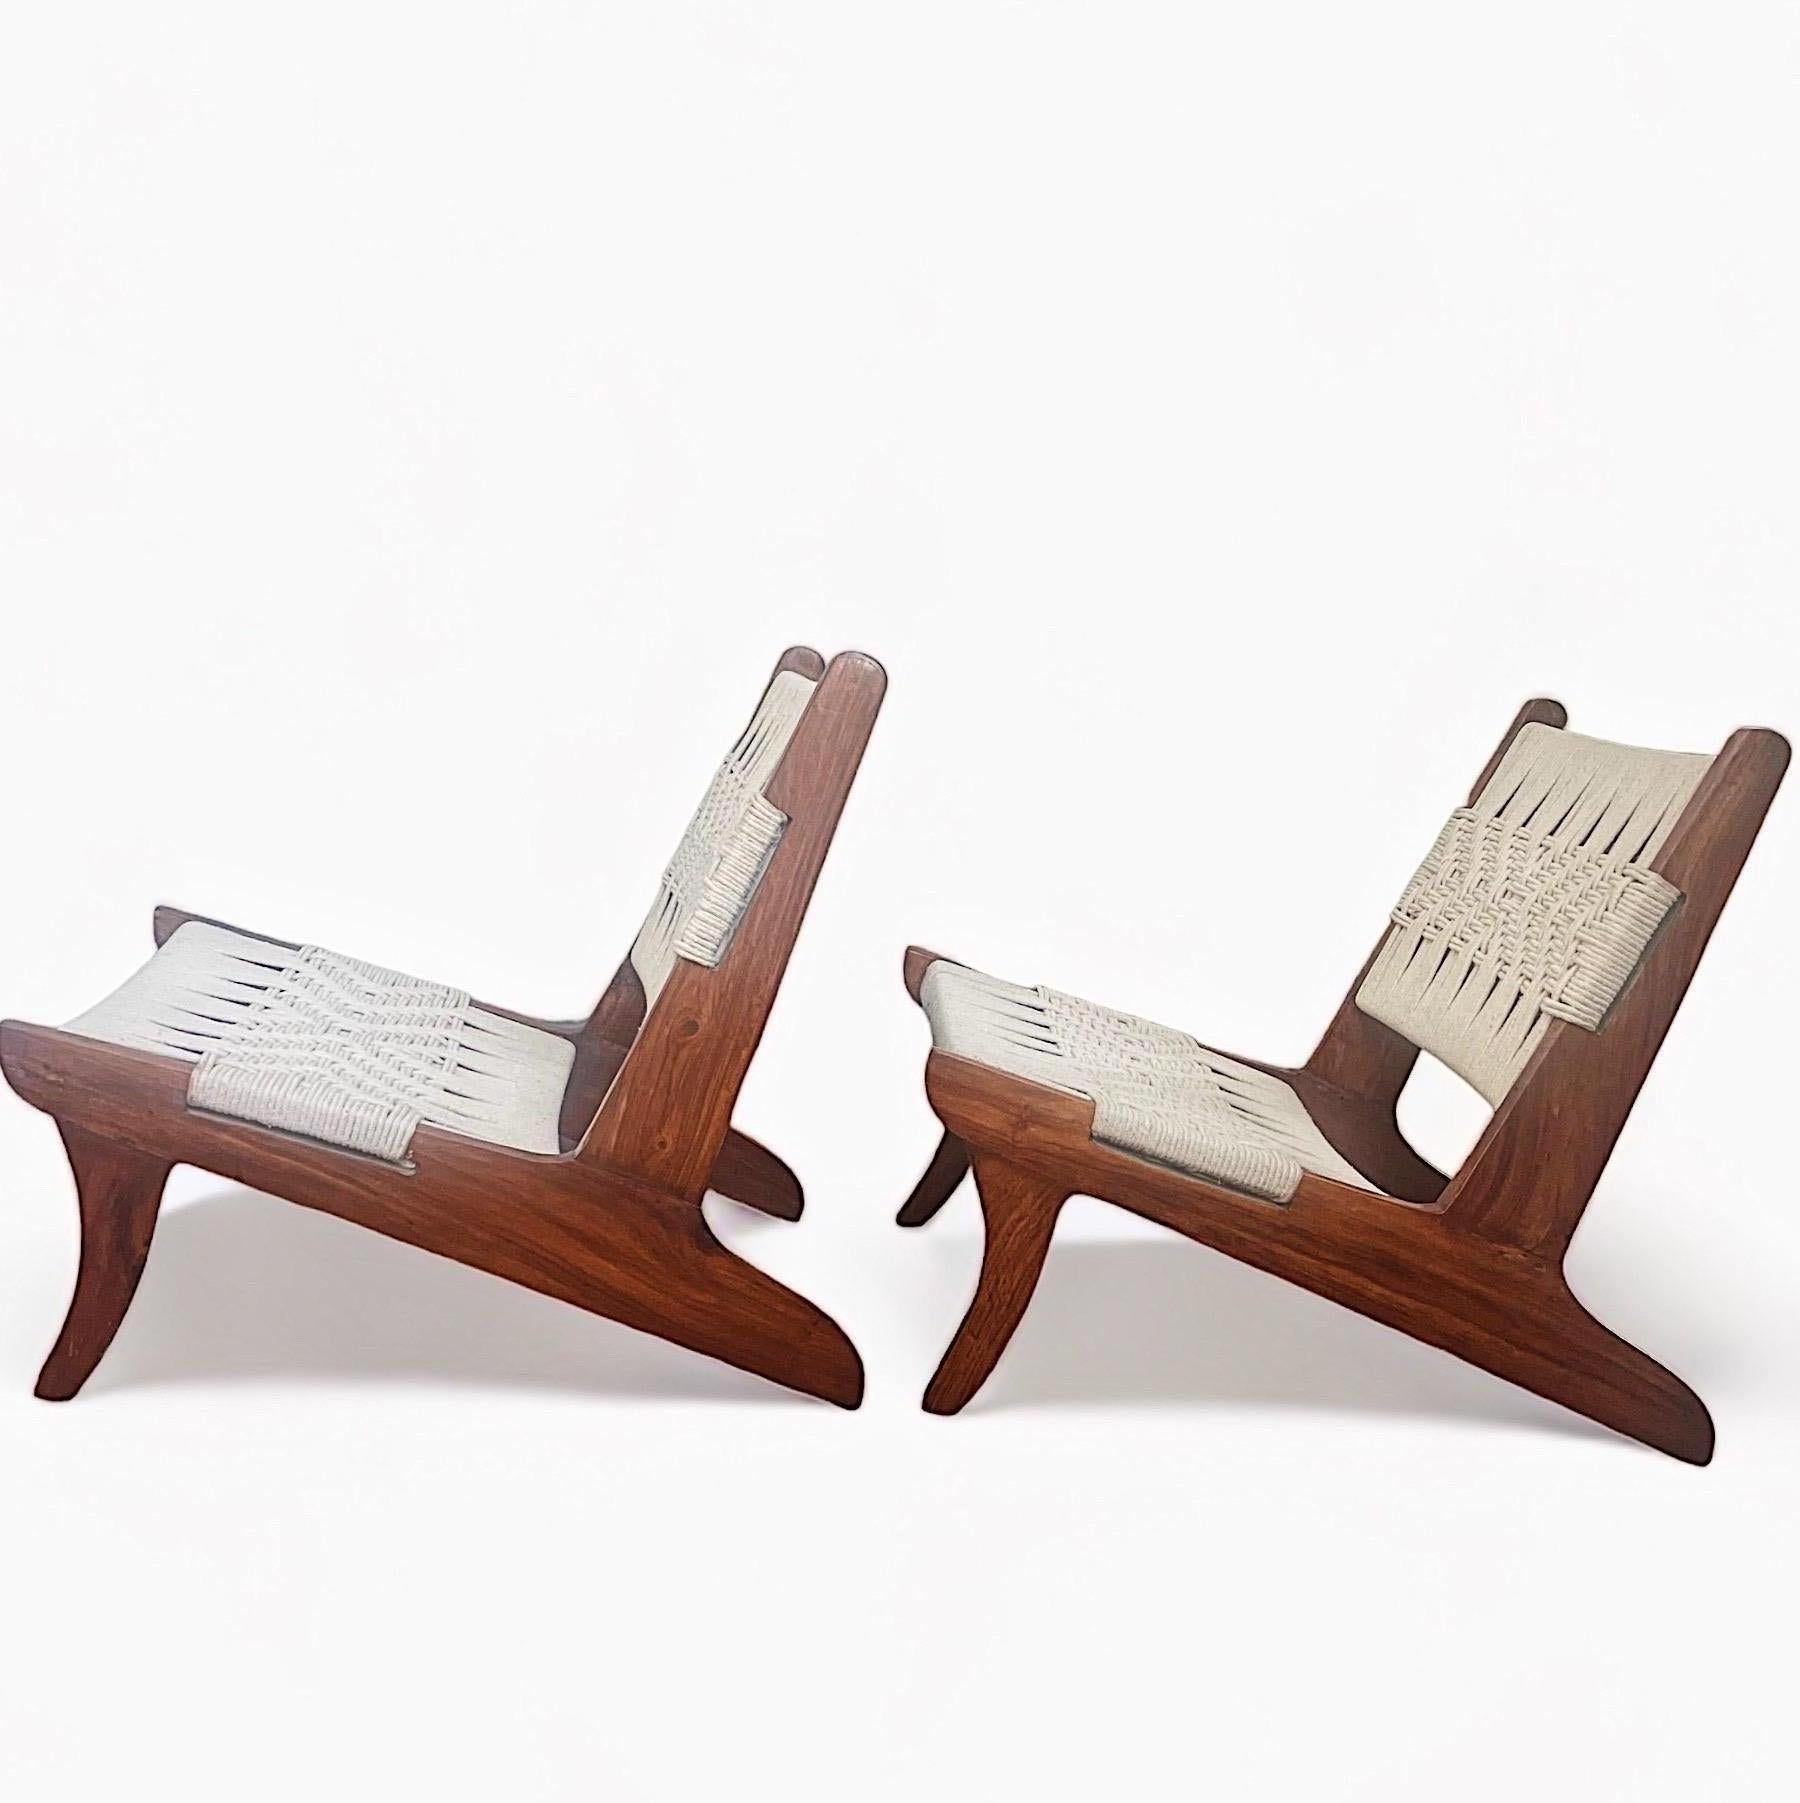 Fantastic pair of sculptural teak and rope low lounge chairs attributed to Pierre Jeanneret. These chairs were sourced from Chandigarh India in the early 2000s. These exact chairs appeared in Sothebys 20th Century Design, Lot 64, June 2015 along